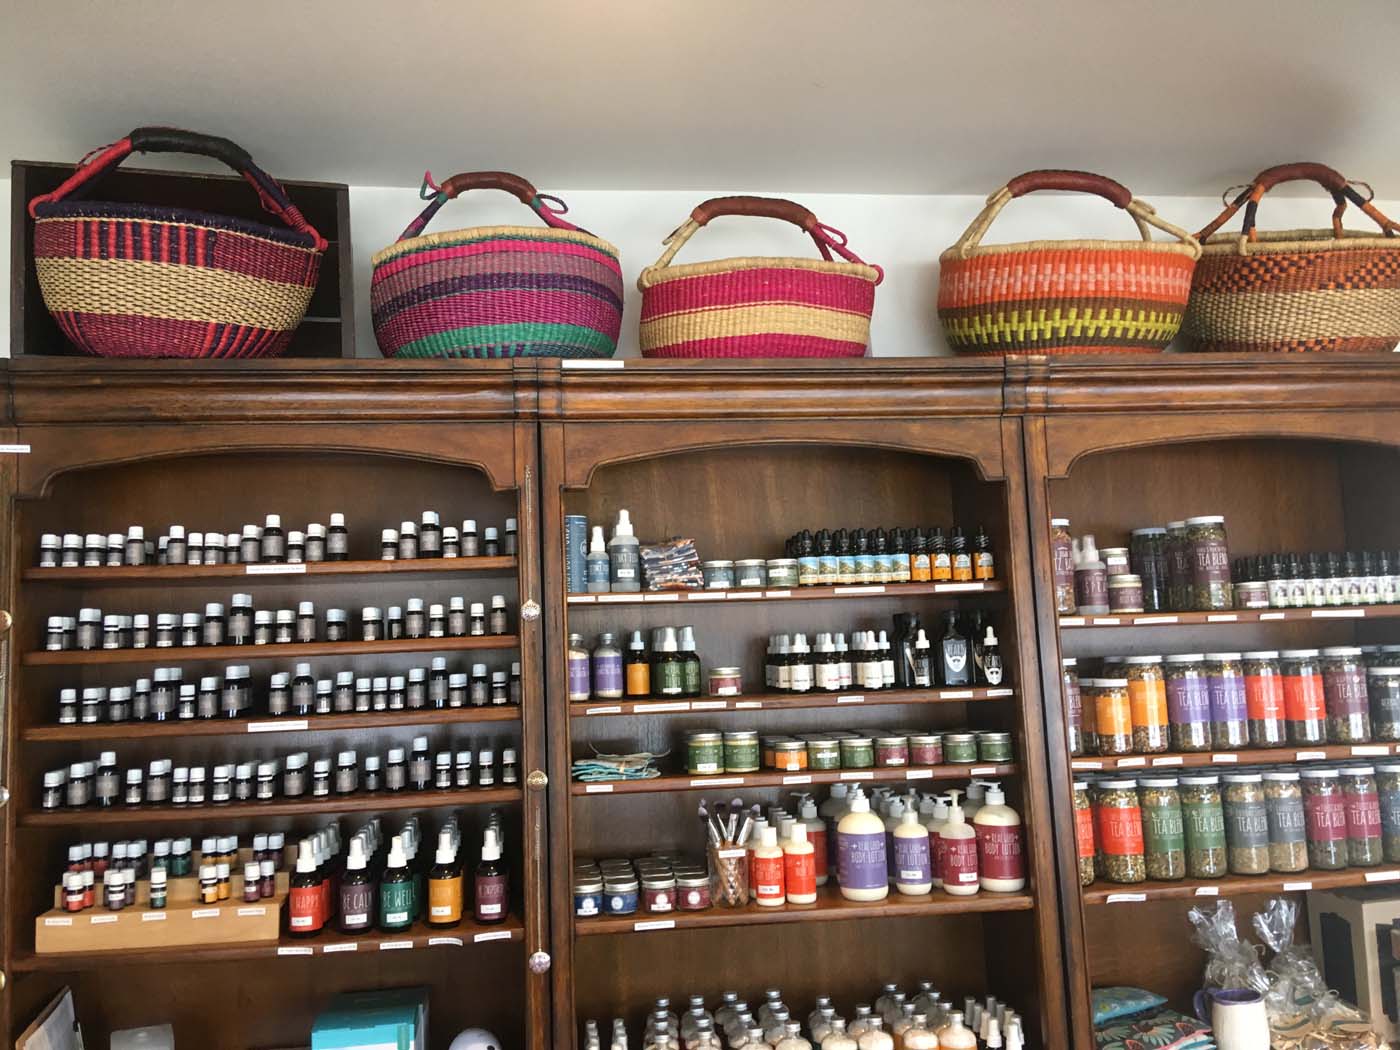 Displaying baskets up high in stores is a very effective use of space